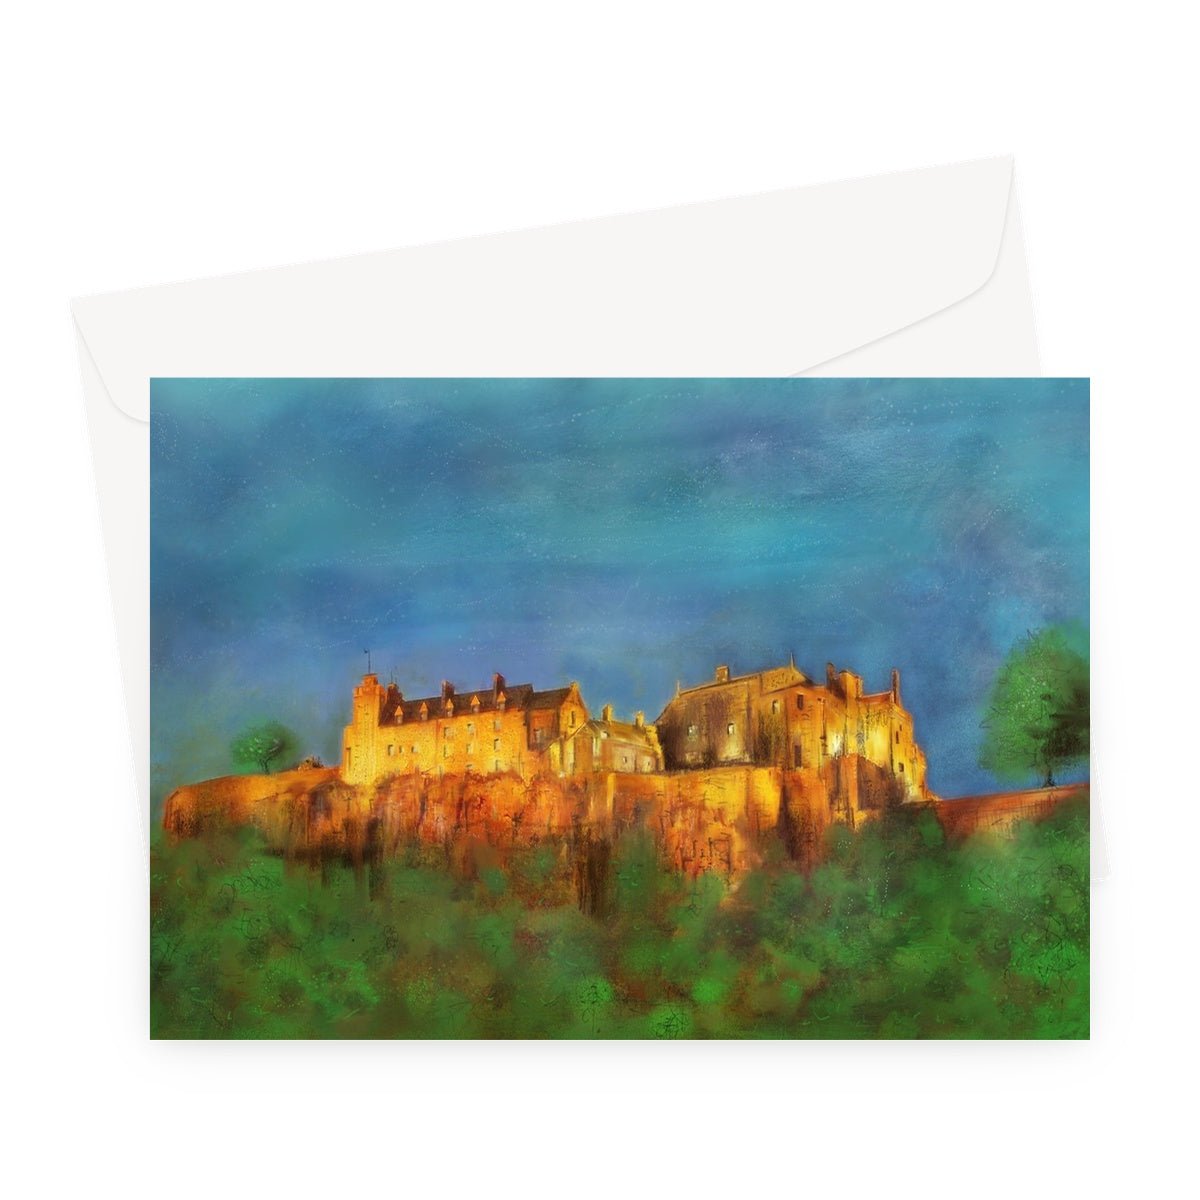 Stirling Castle Art Gifts Greeting Card-Greetings Cards-Scottish Castles Art Gallery-A5 Landscape-10 Cards-Paintings, Prints, Homeware, Art Gifts From Scotland By Scottish Artist Kevin Hunter